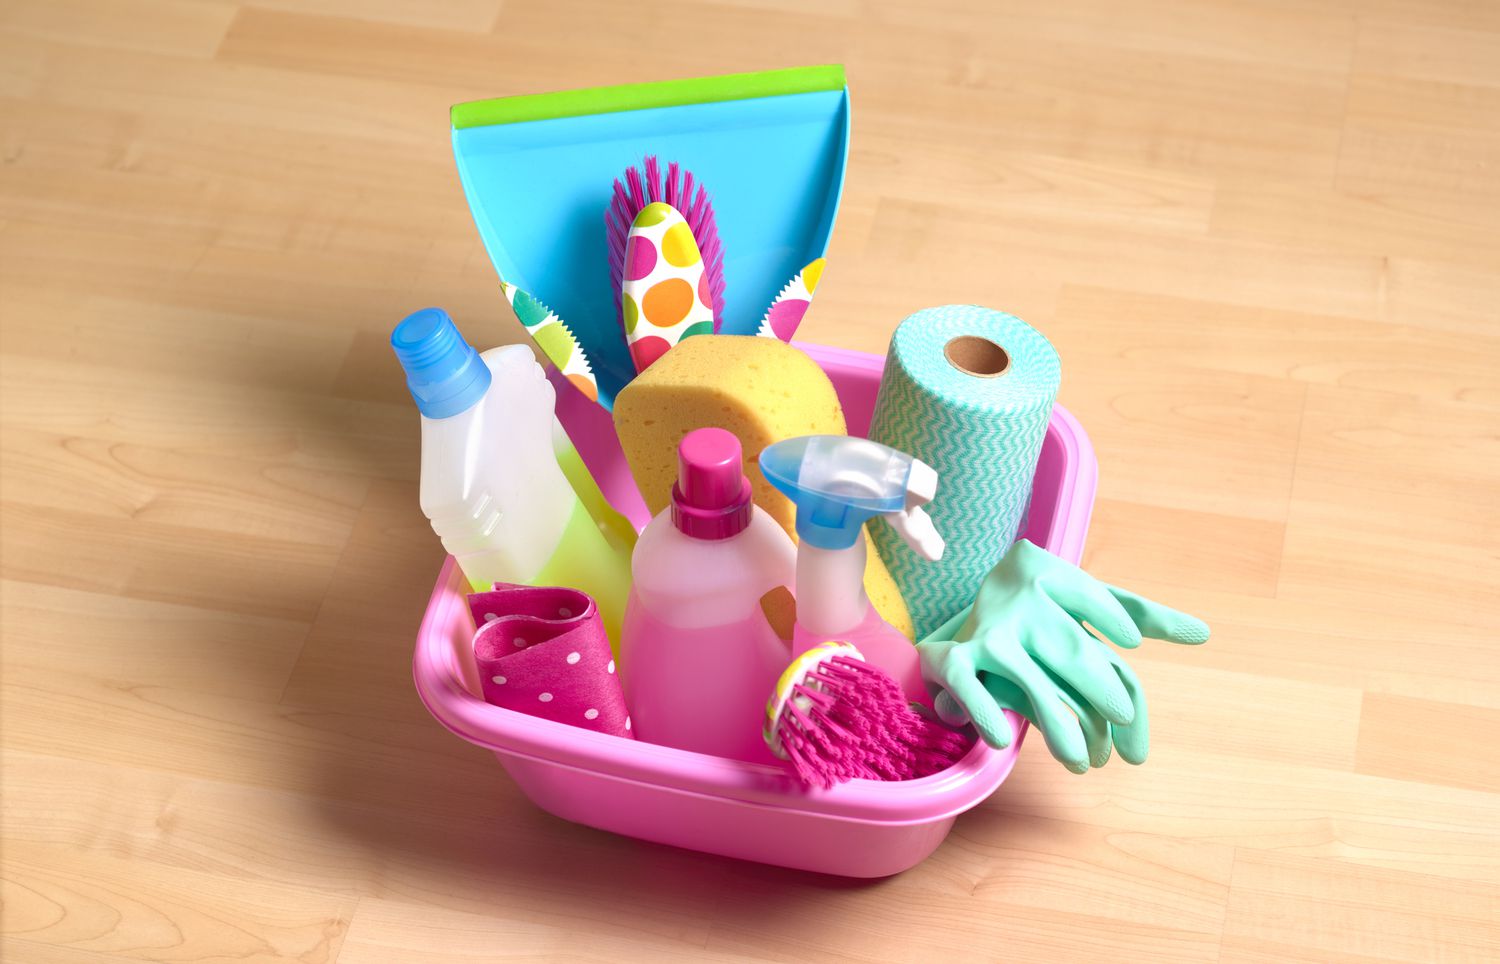 A pink shower caddy filled with cleaning supplies.